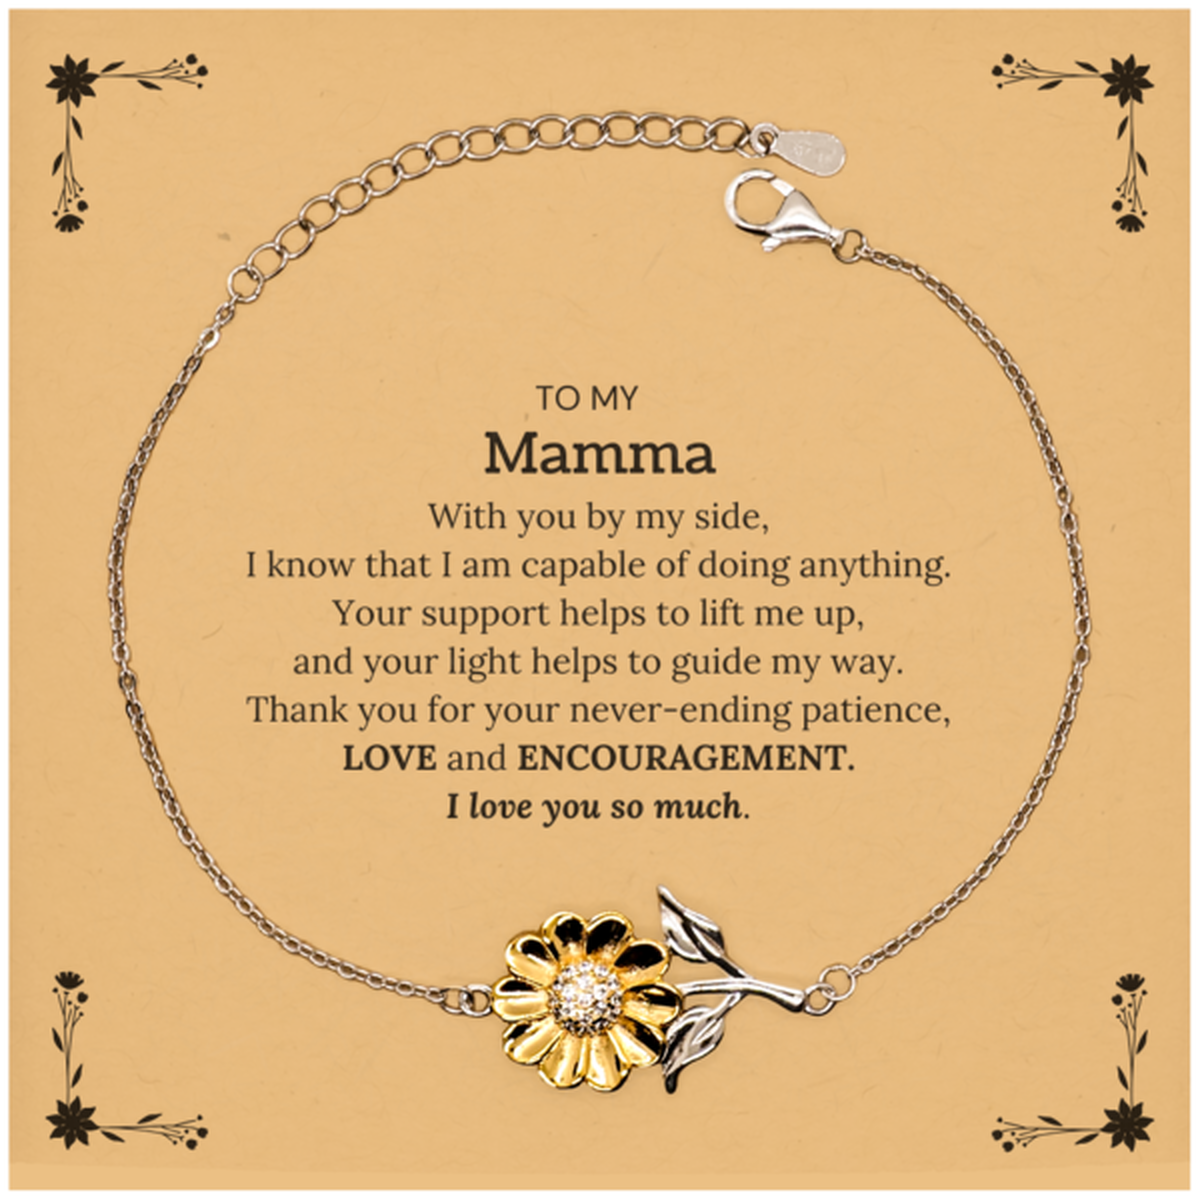 Appreciation Mamma Sunflower Bracelet Gifts, To My Mamma Birthday Christmas Wedding Keepsake Gifts for Mamma With you by my side, I know that I am capable of doing anything. I love you so much